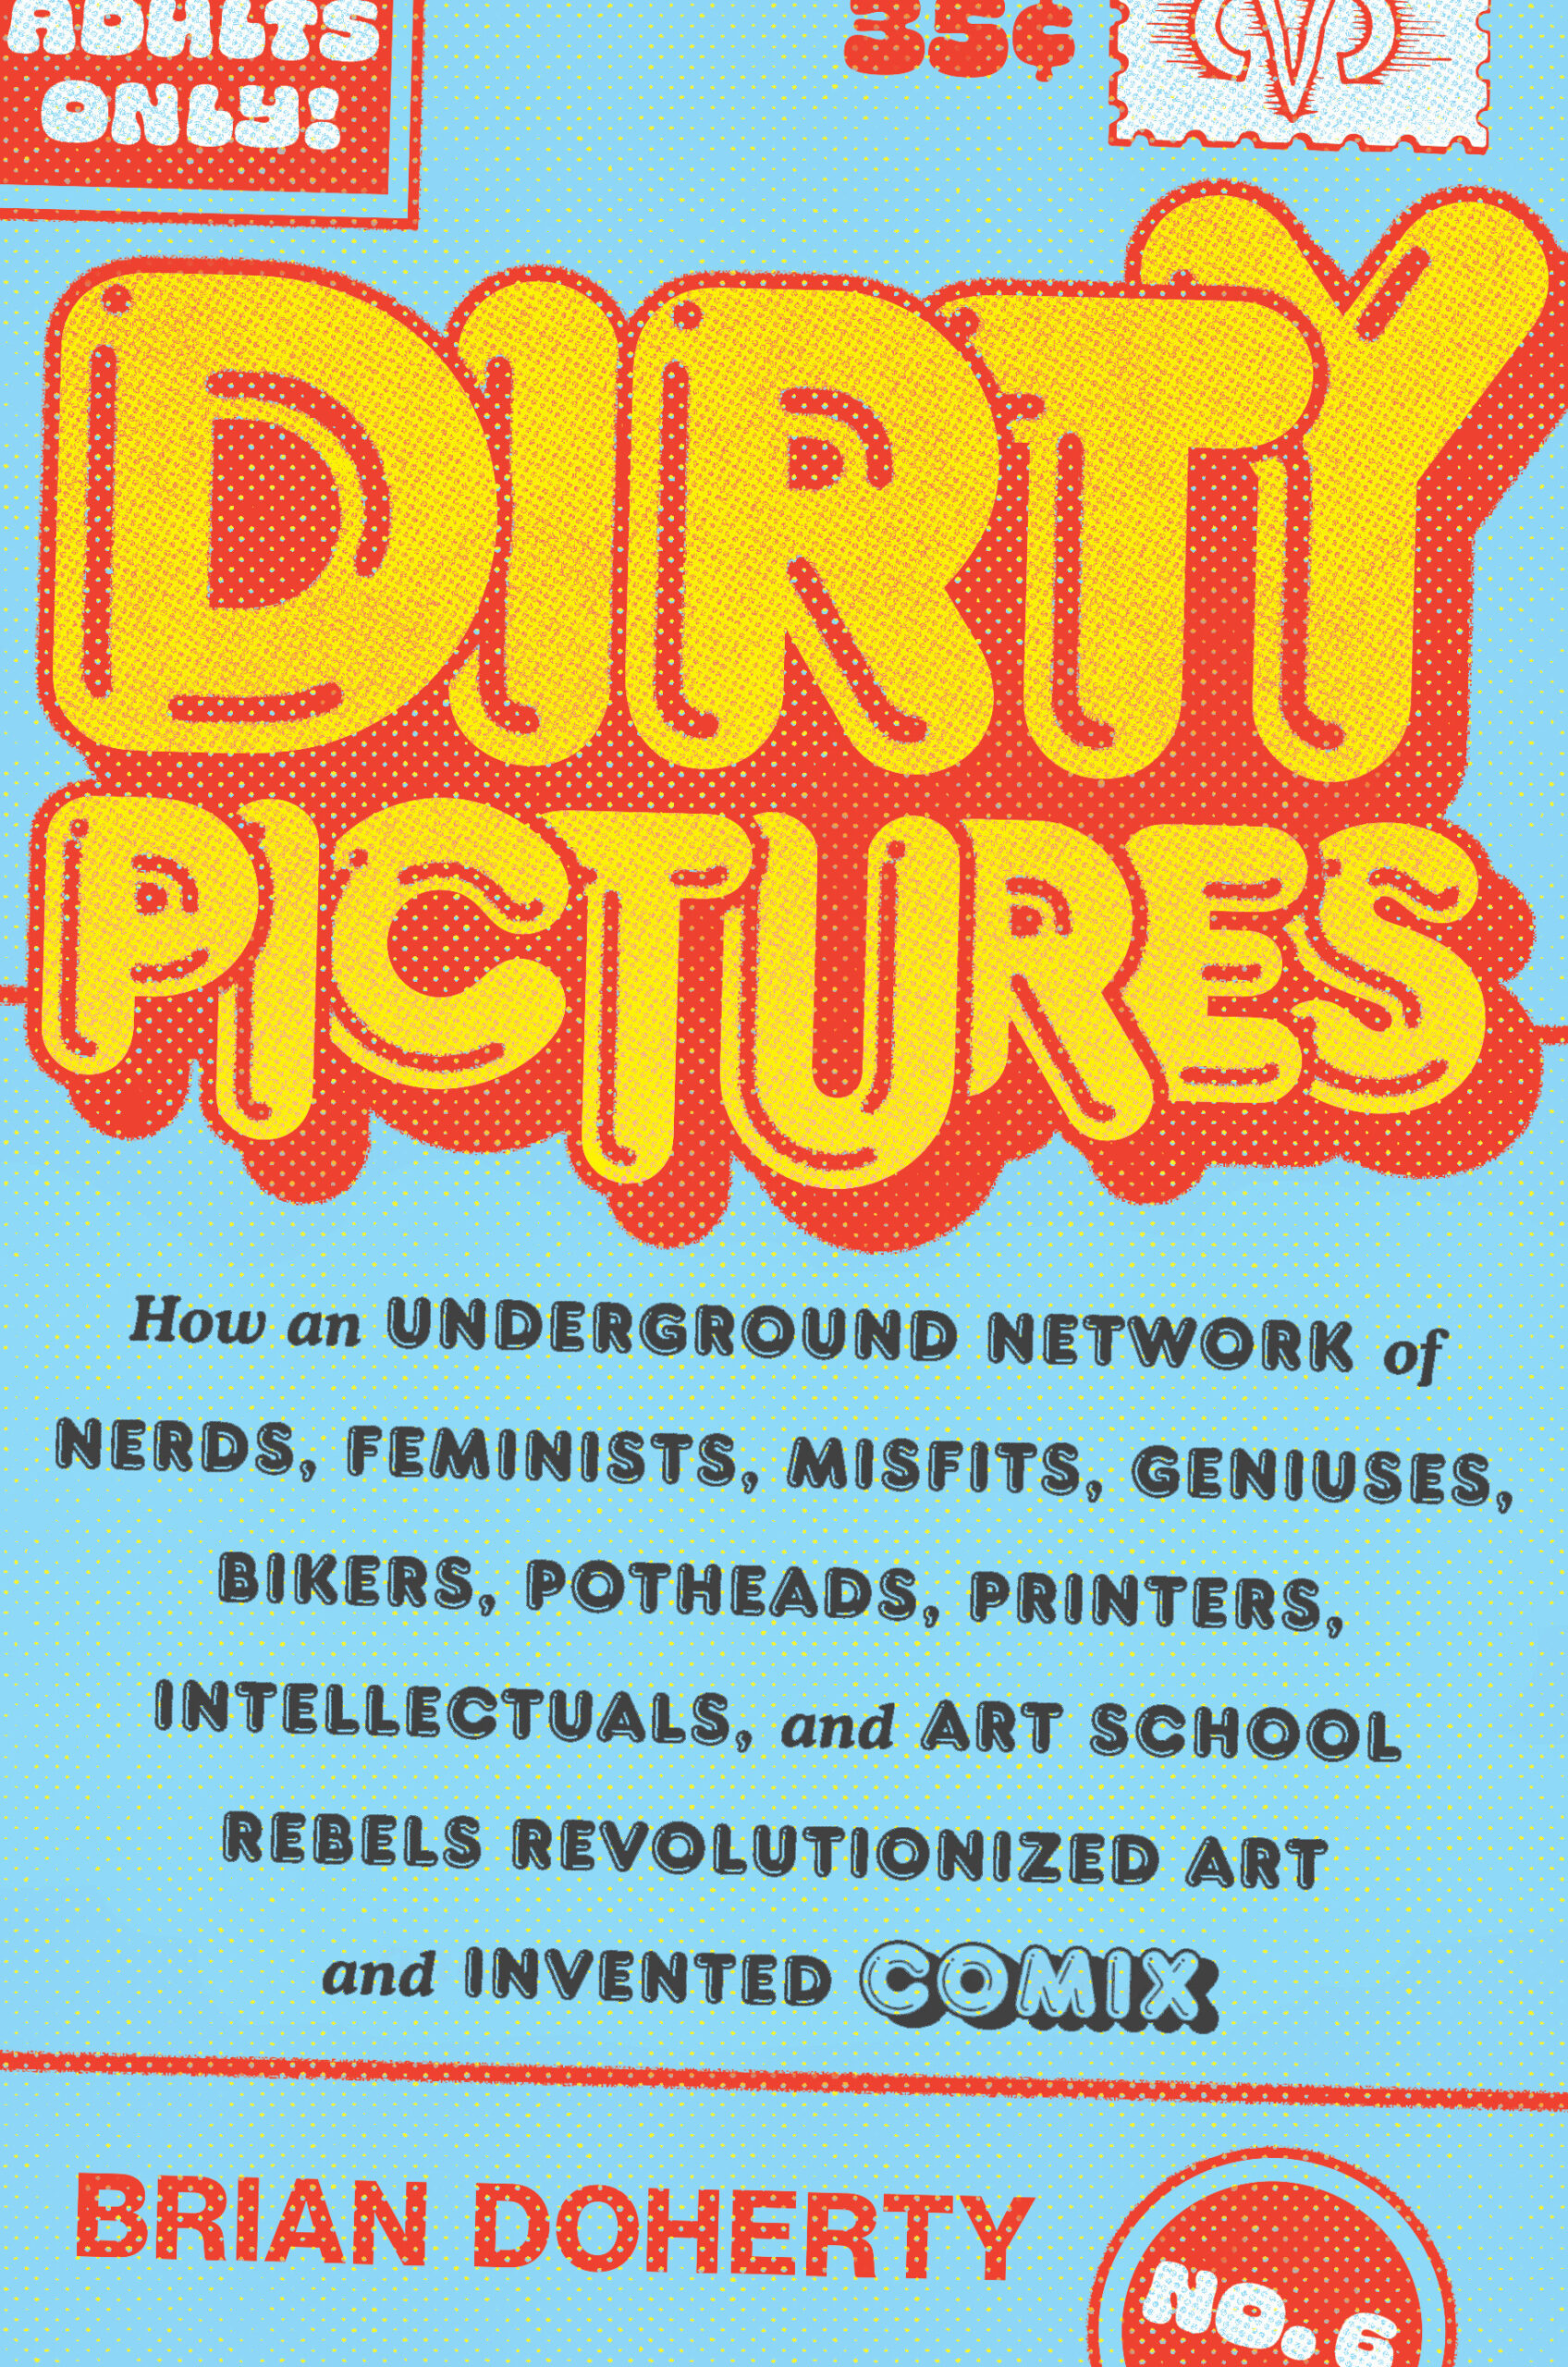 Dirty Pictures_Brian Doherty